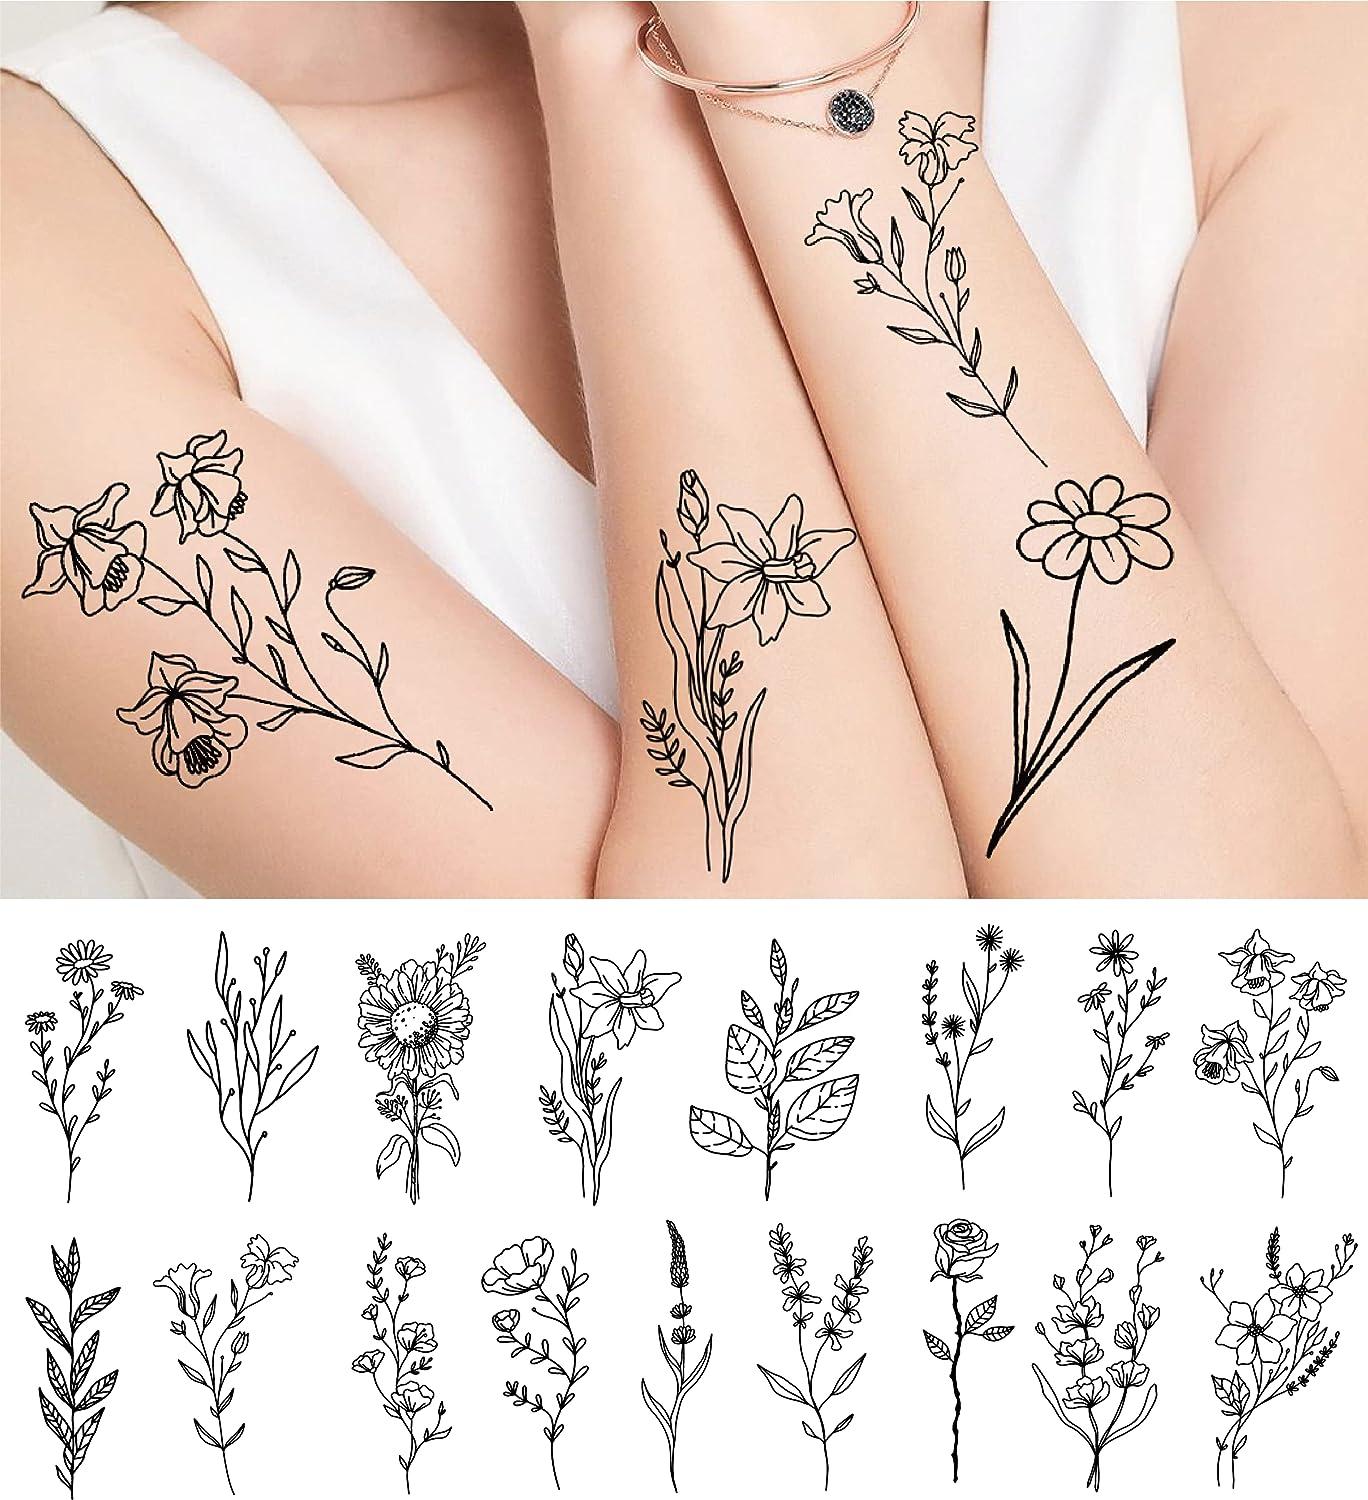 73 Cute Small Aesthetic Tattoos Images In 2023 | Neck tattoos women,  Aesthetic tattoo, Small girl tattoos